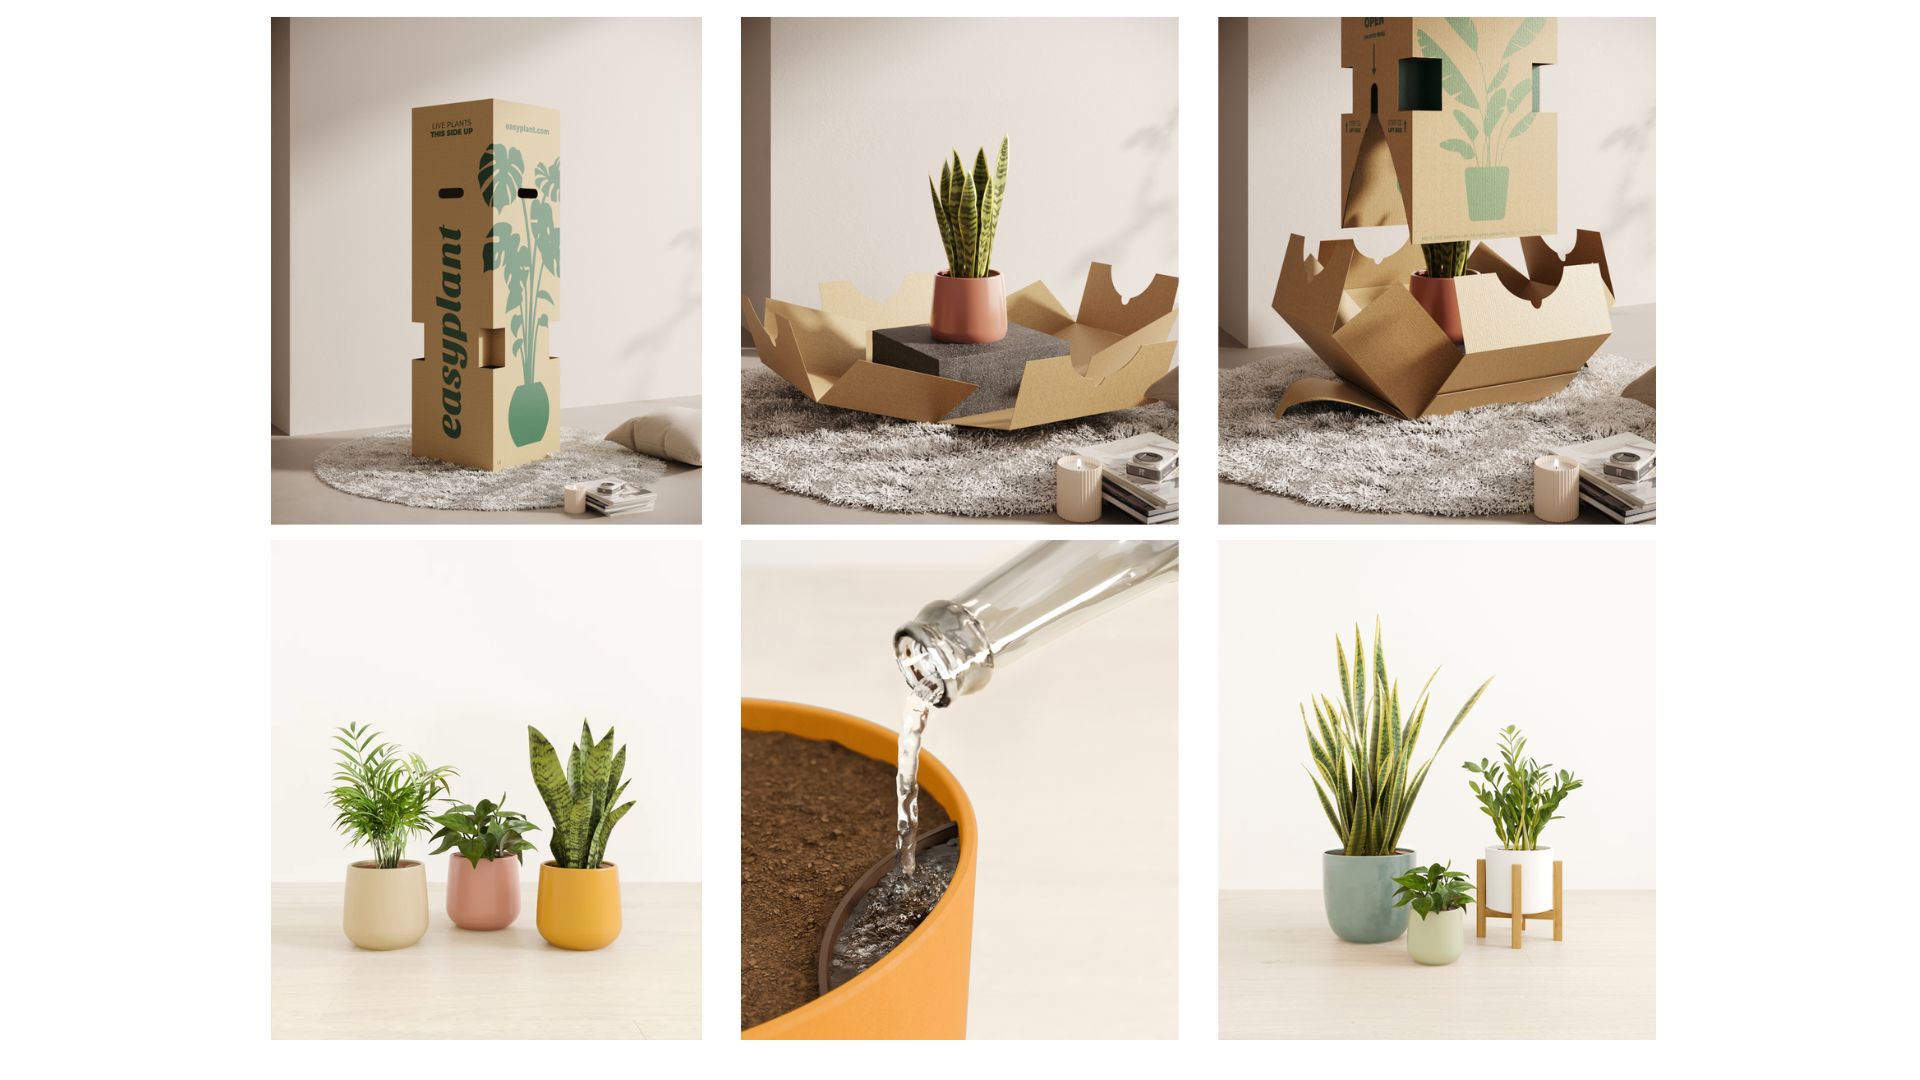 Product CGI Project for EasyPlant 